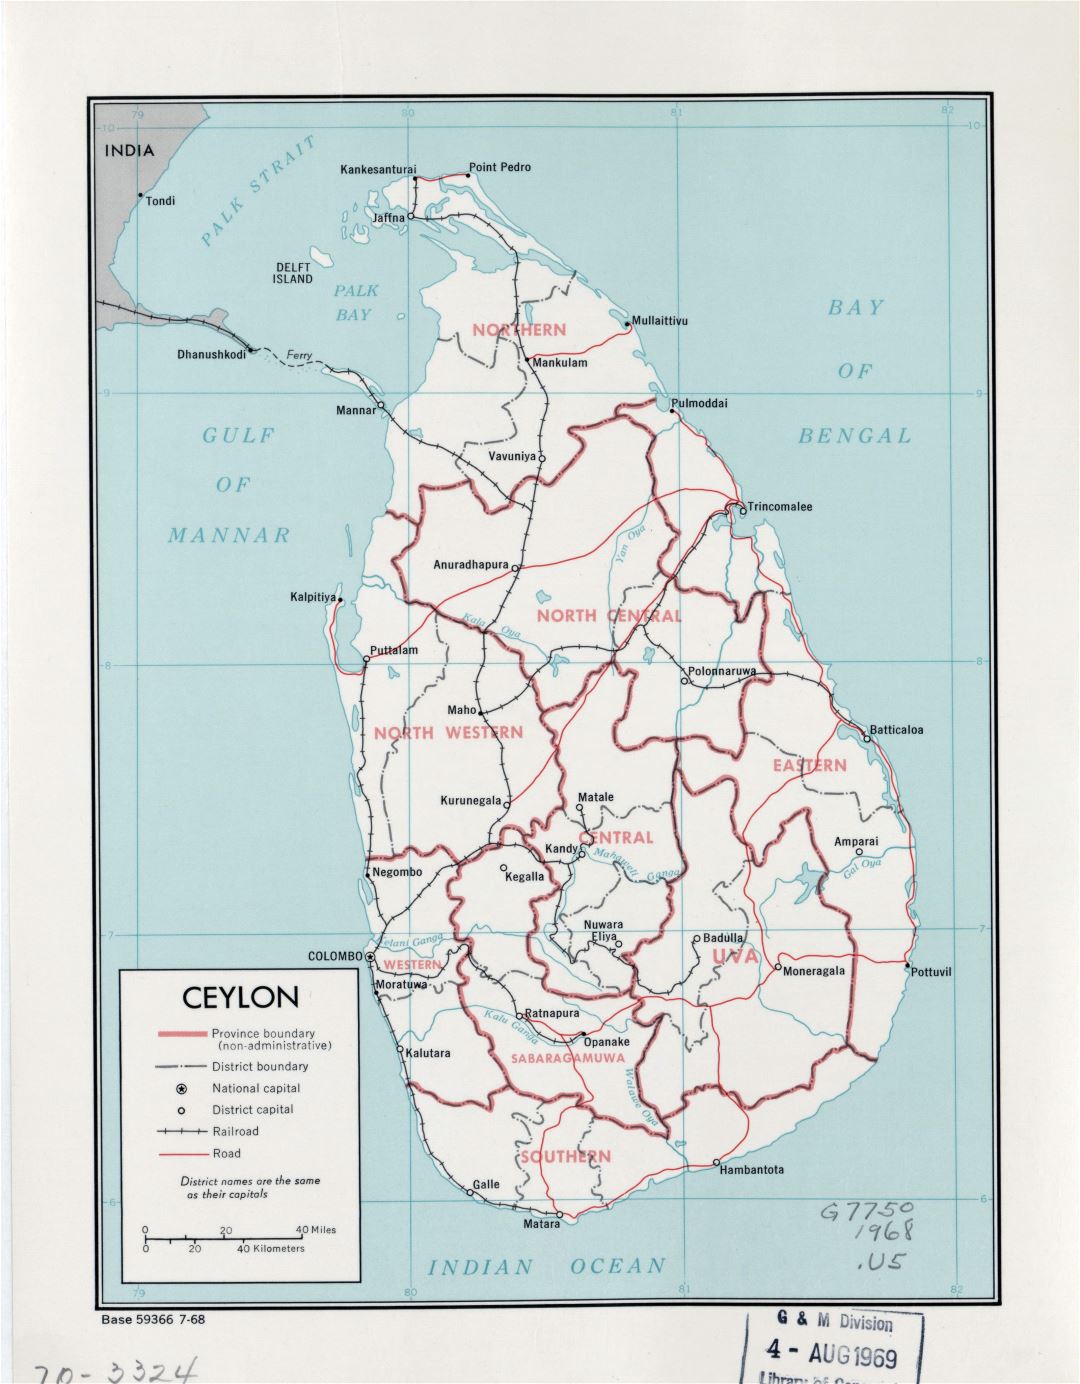 Large detailed political and administrative map of Sri Lanka (Ceylon) with roads, railroads, and major cities - 1968